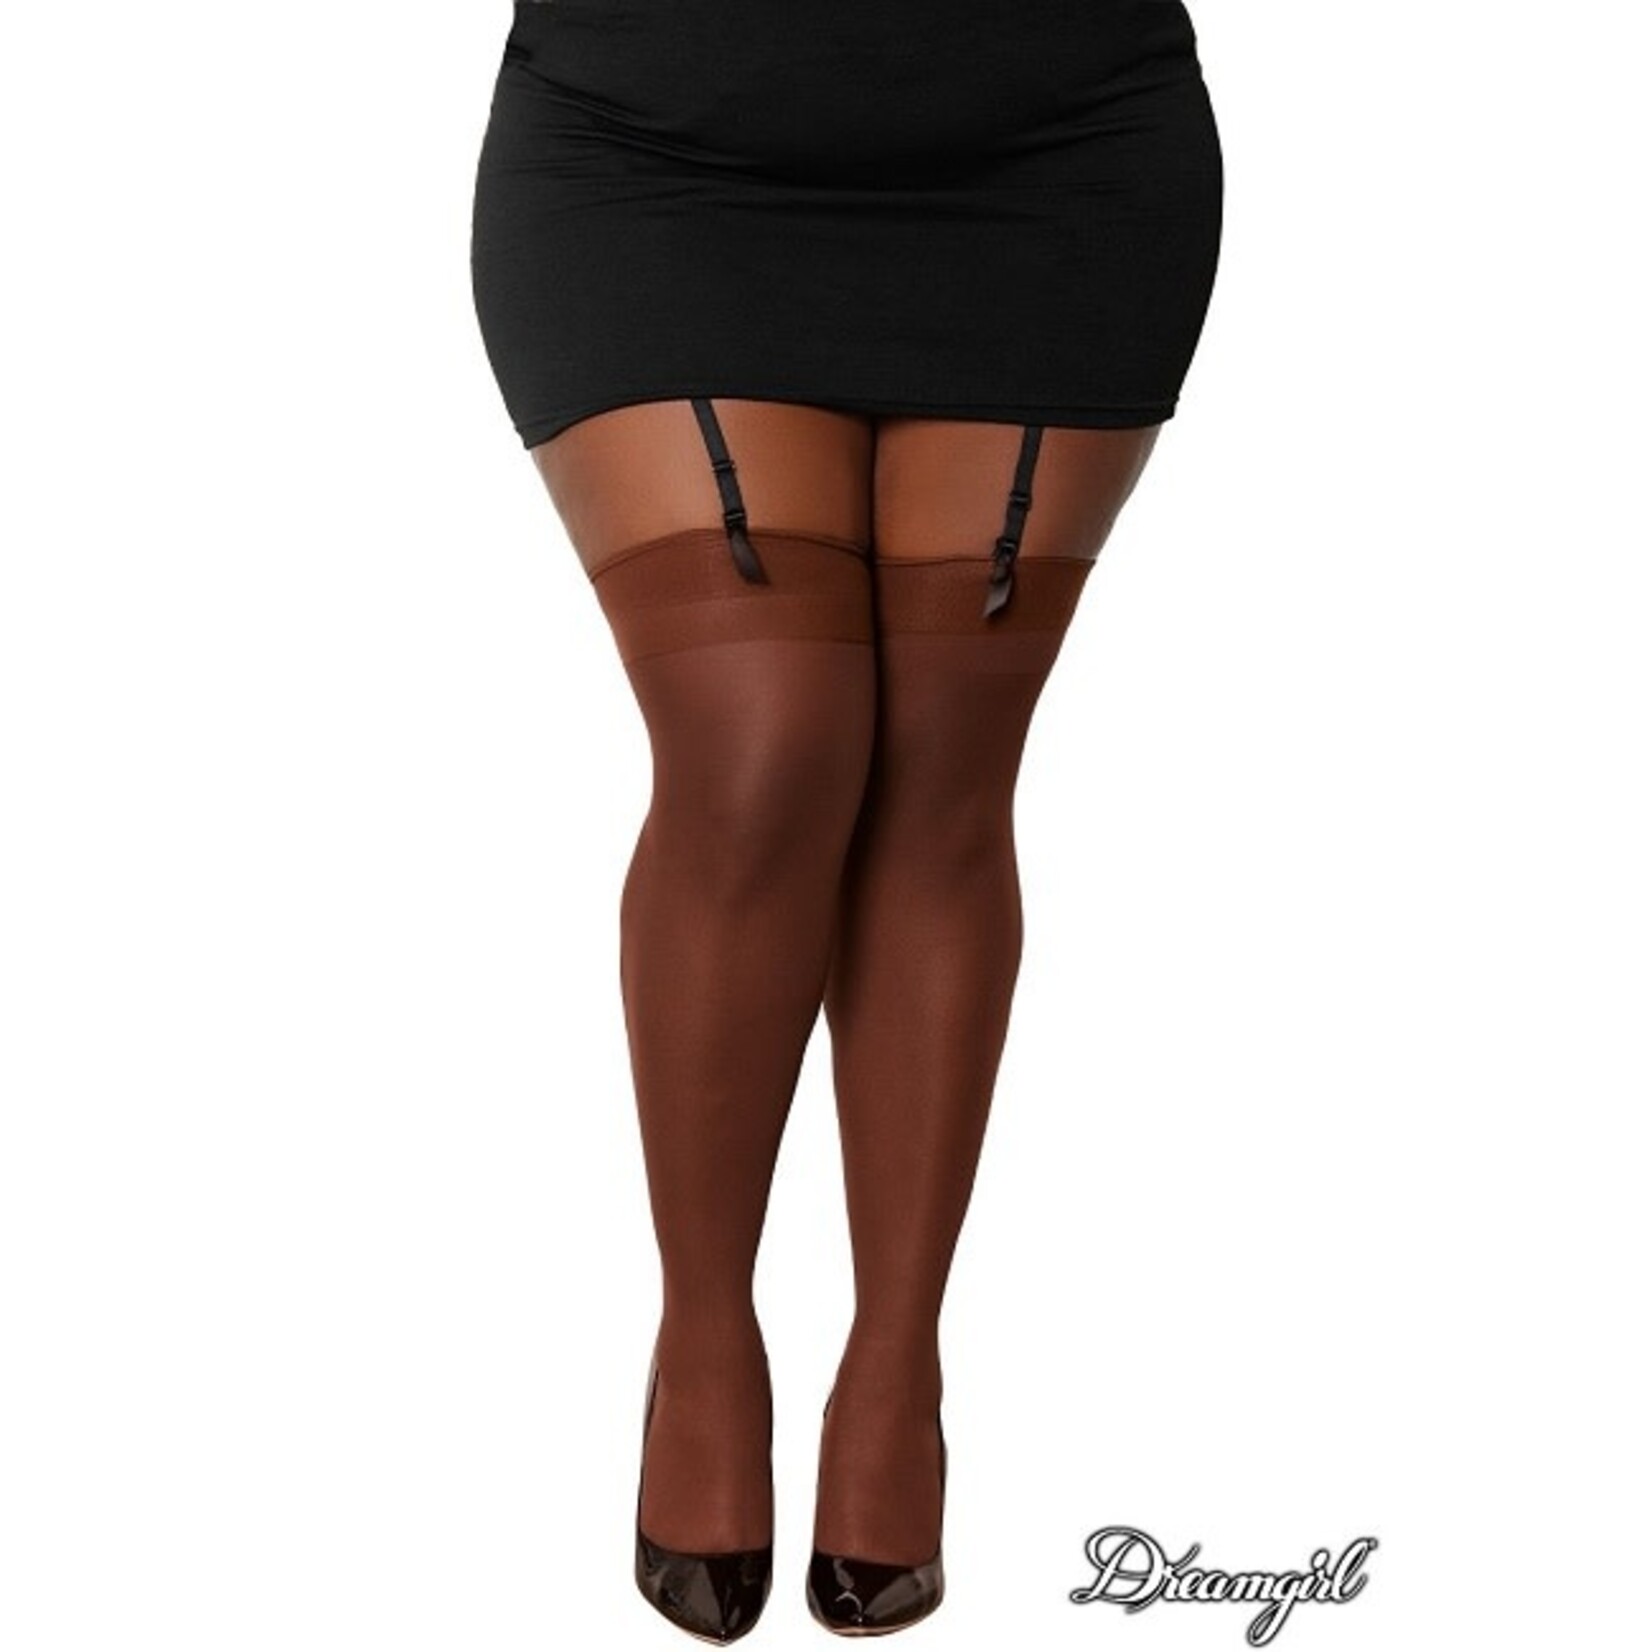 Dreamgirl Dreamgirl Moulin Sheer Stocking with Back Seam OSX